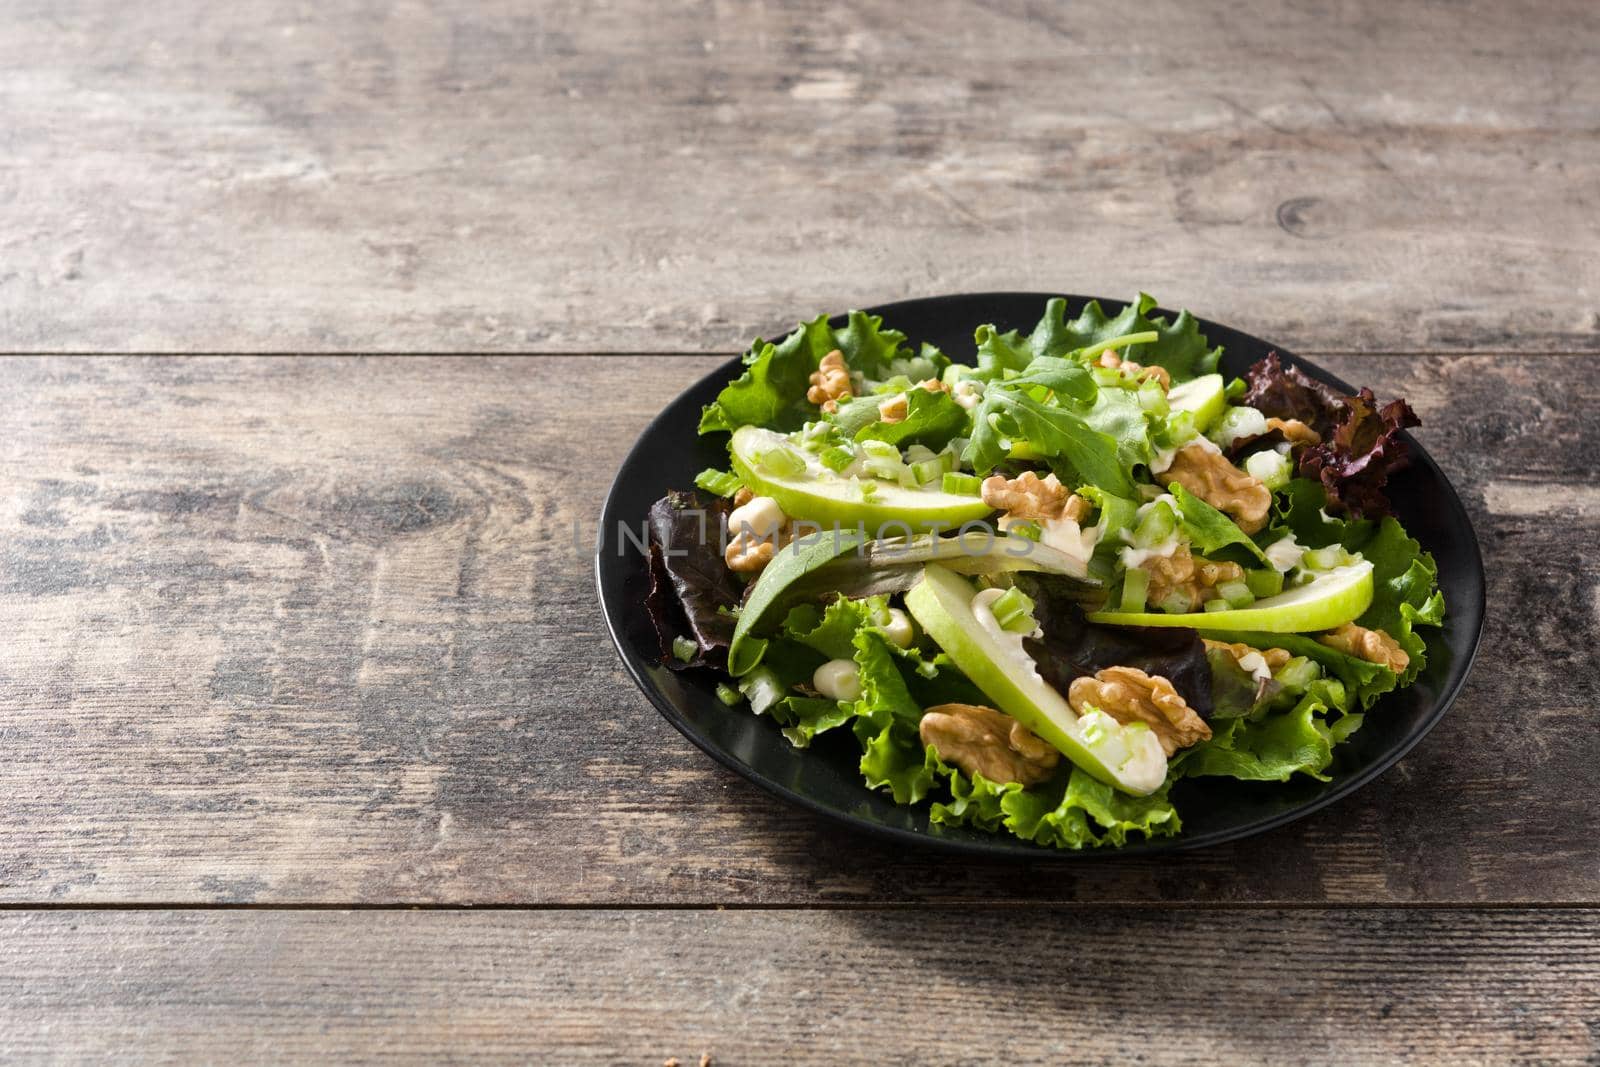 Fresh Waldorf salad with lettuce, green apples, walnuts and celery isolated on whtie background